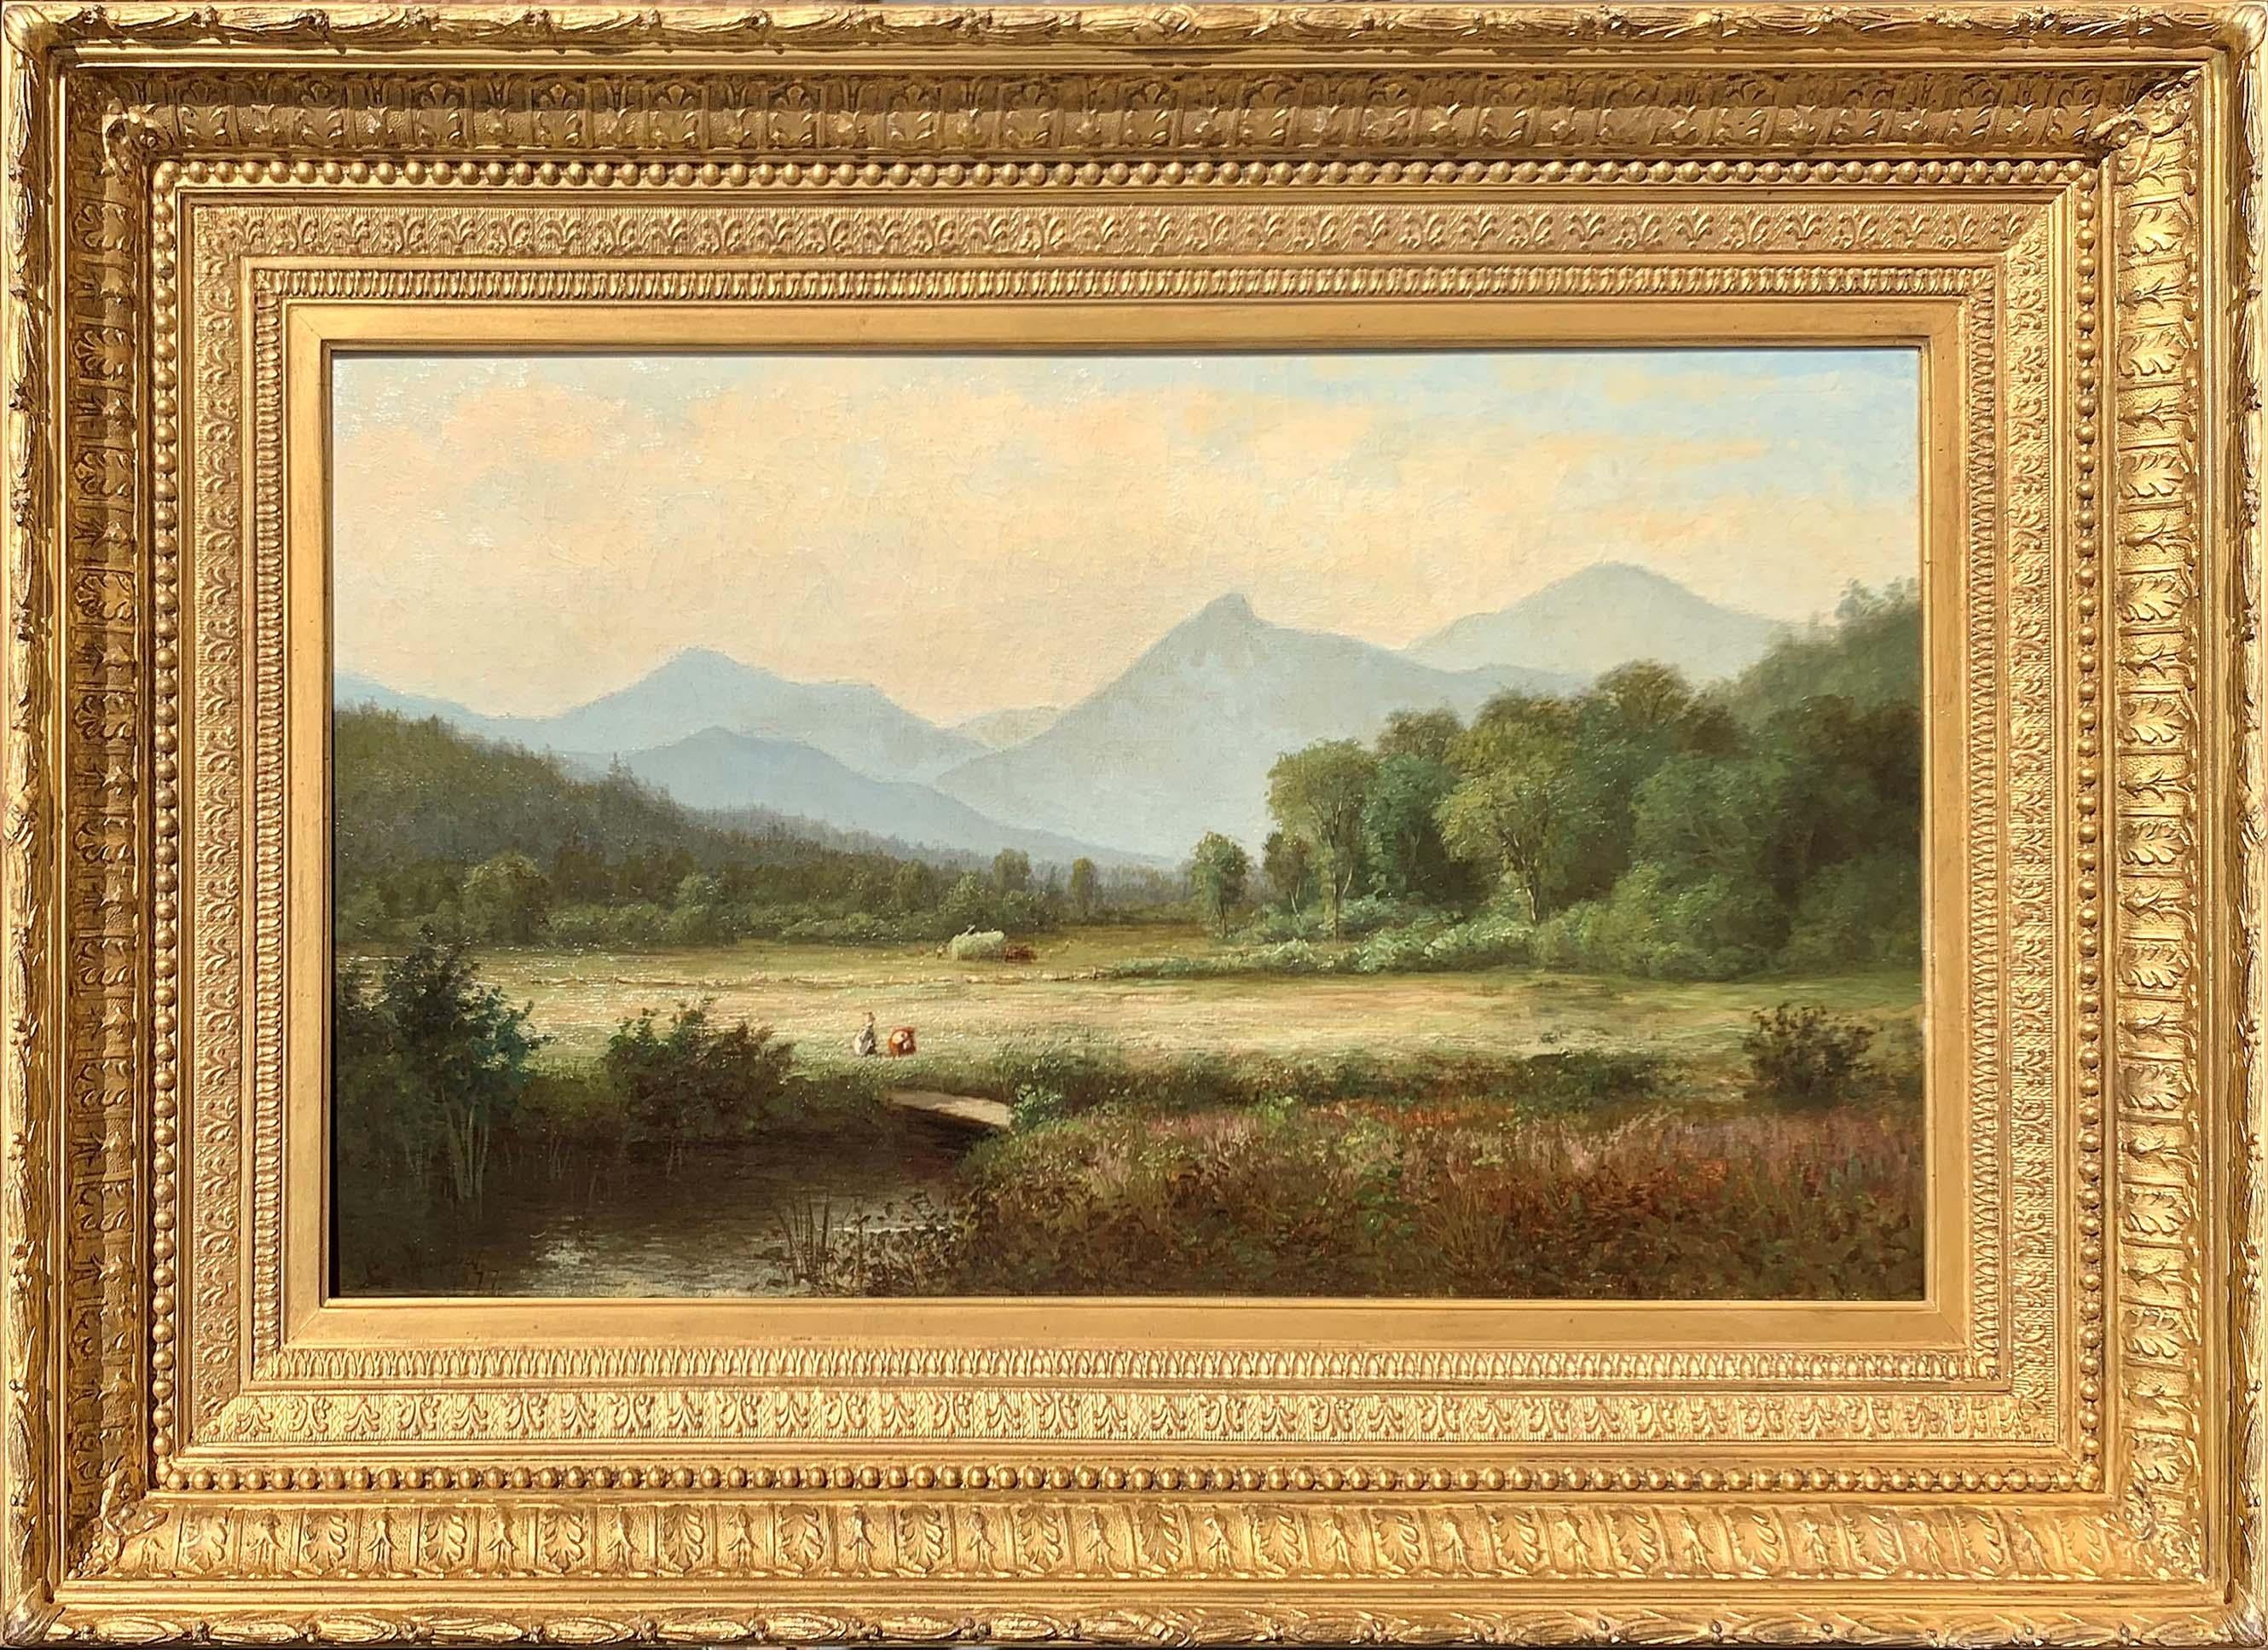 Painted by Hudson River School artist Laura Woodward (1834-1926), "Camel's Hump, Vermont" 1877 is oil on canvas and measures 14 x 24 inches. It is signed and dated at the lower left. The work is framed in an elegant and period appropriate frame and